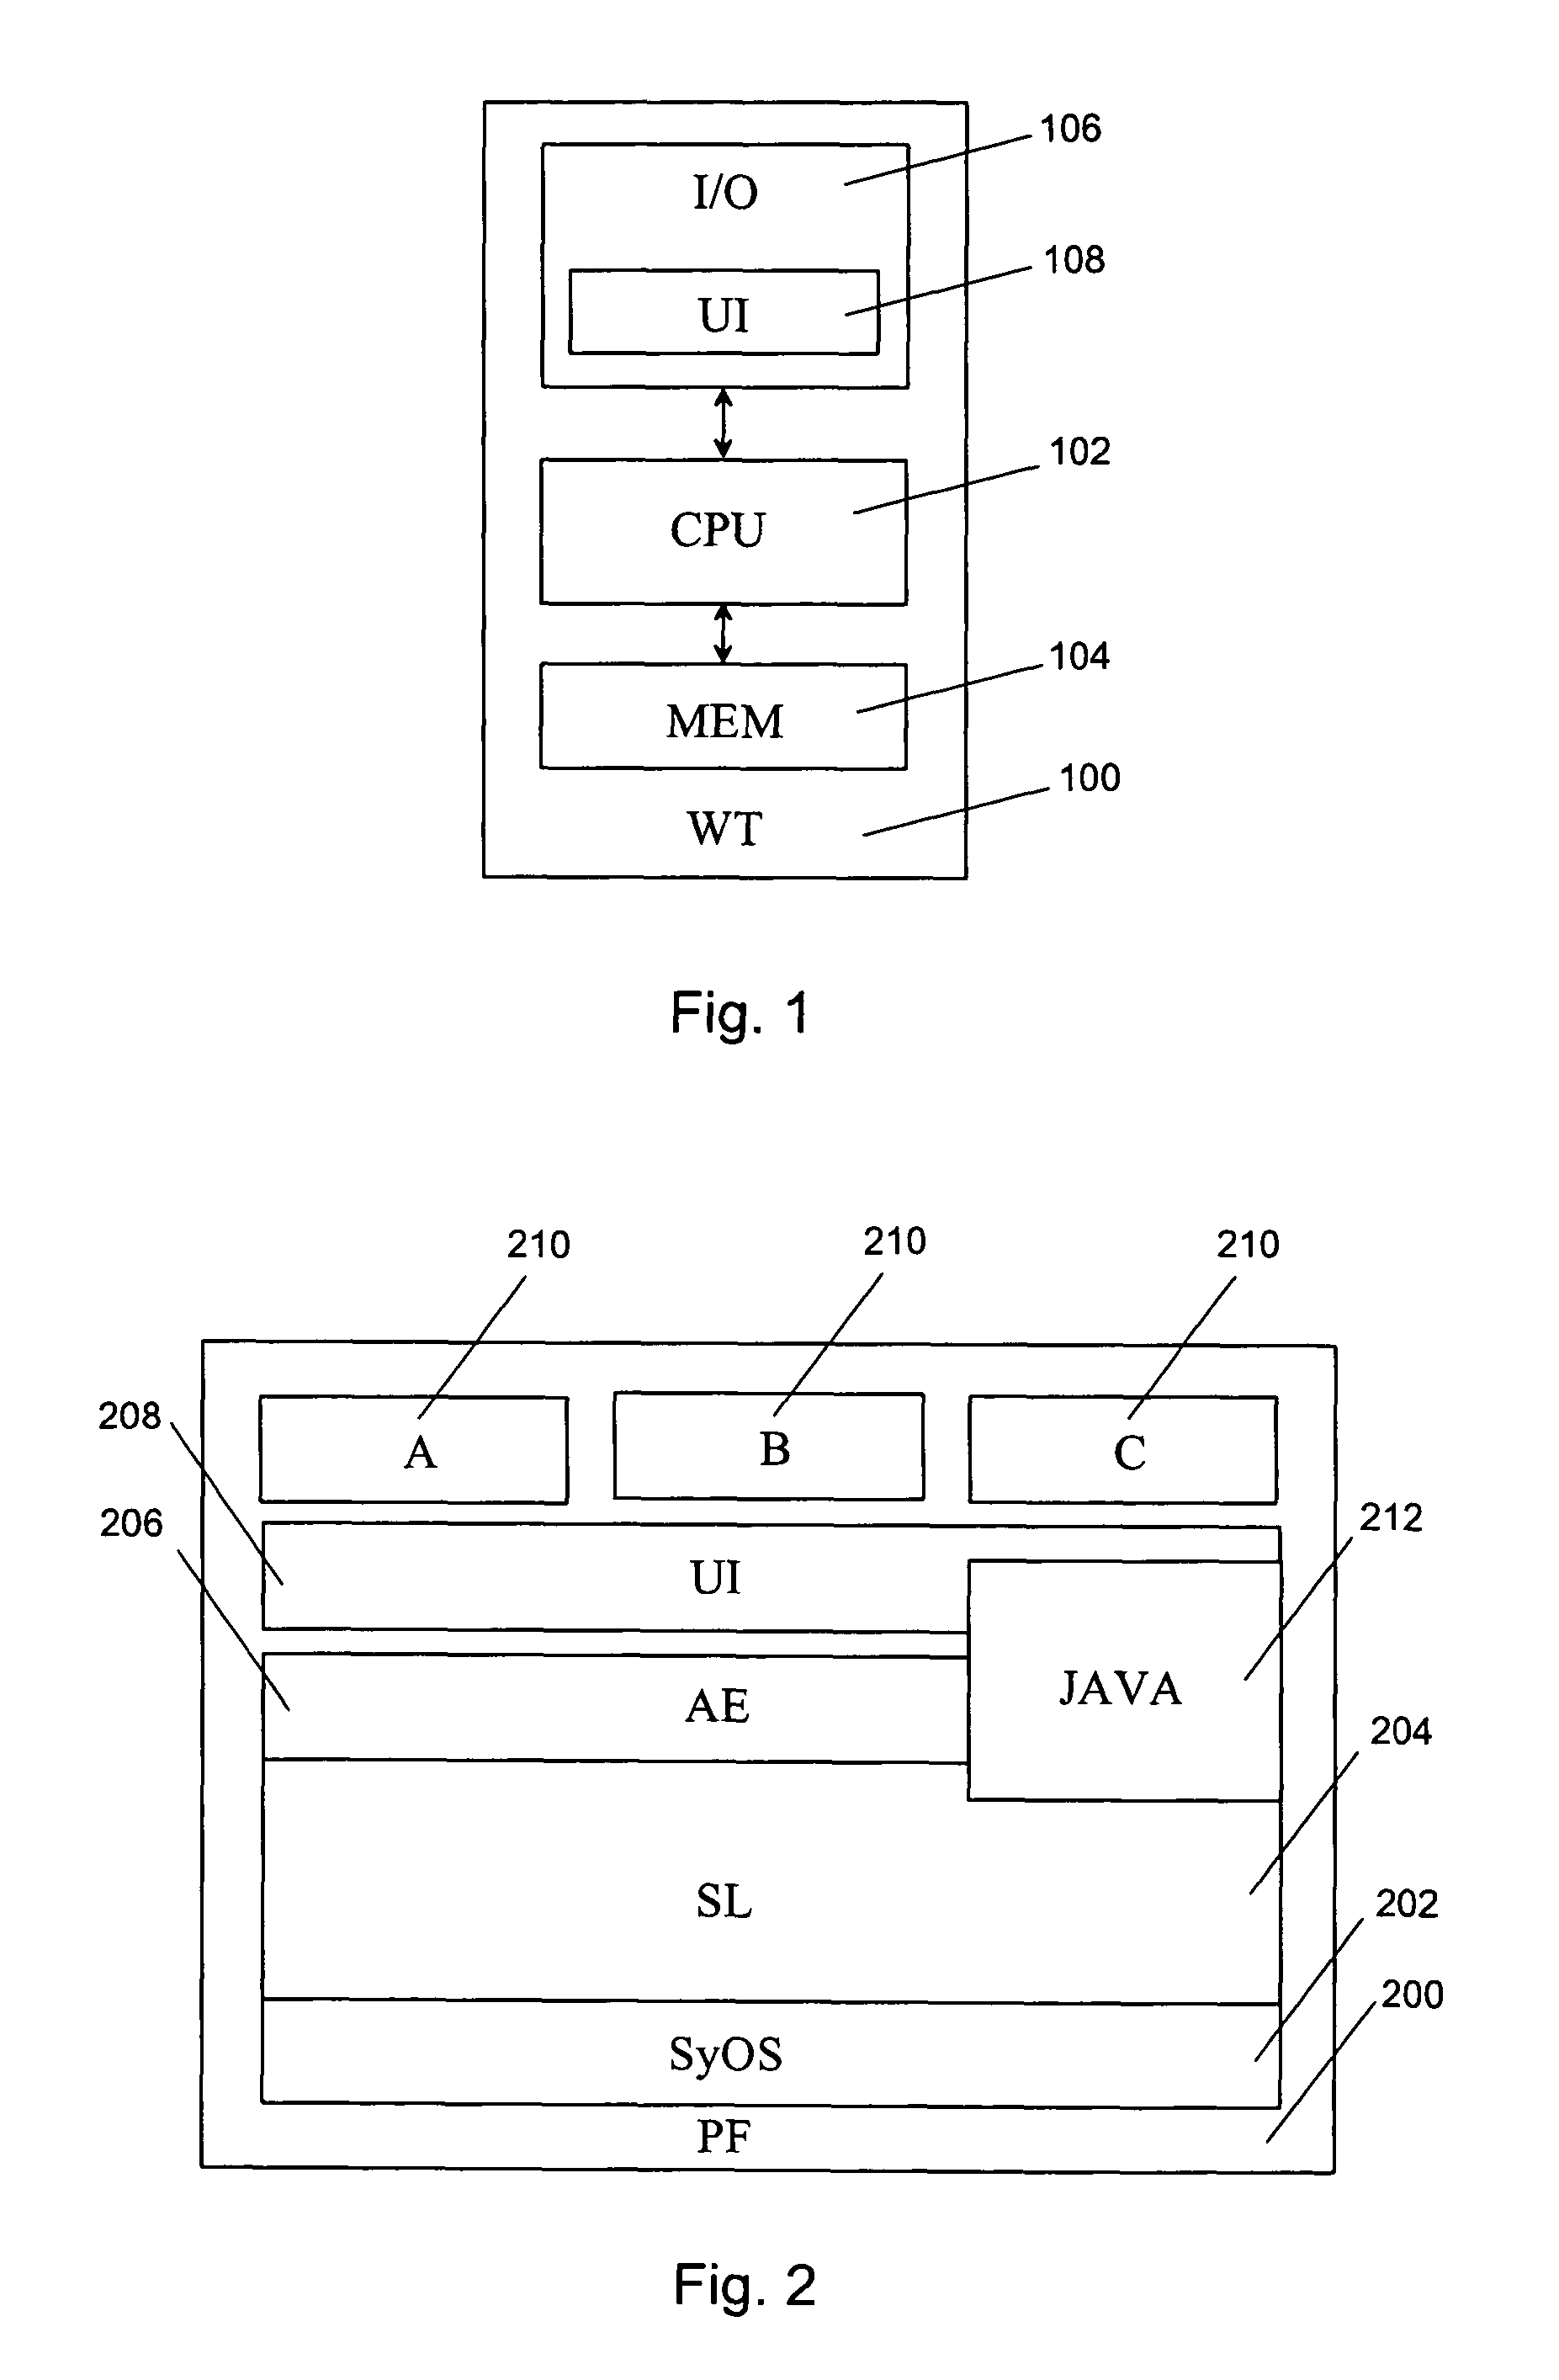 Method for processing status information on determined functions in wireless terminal device